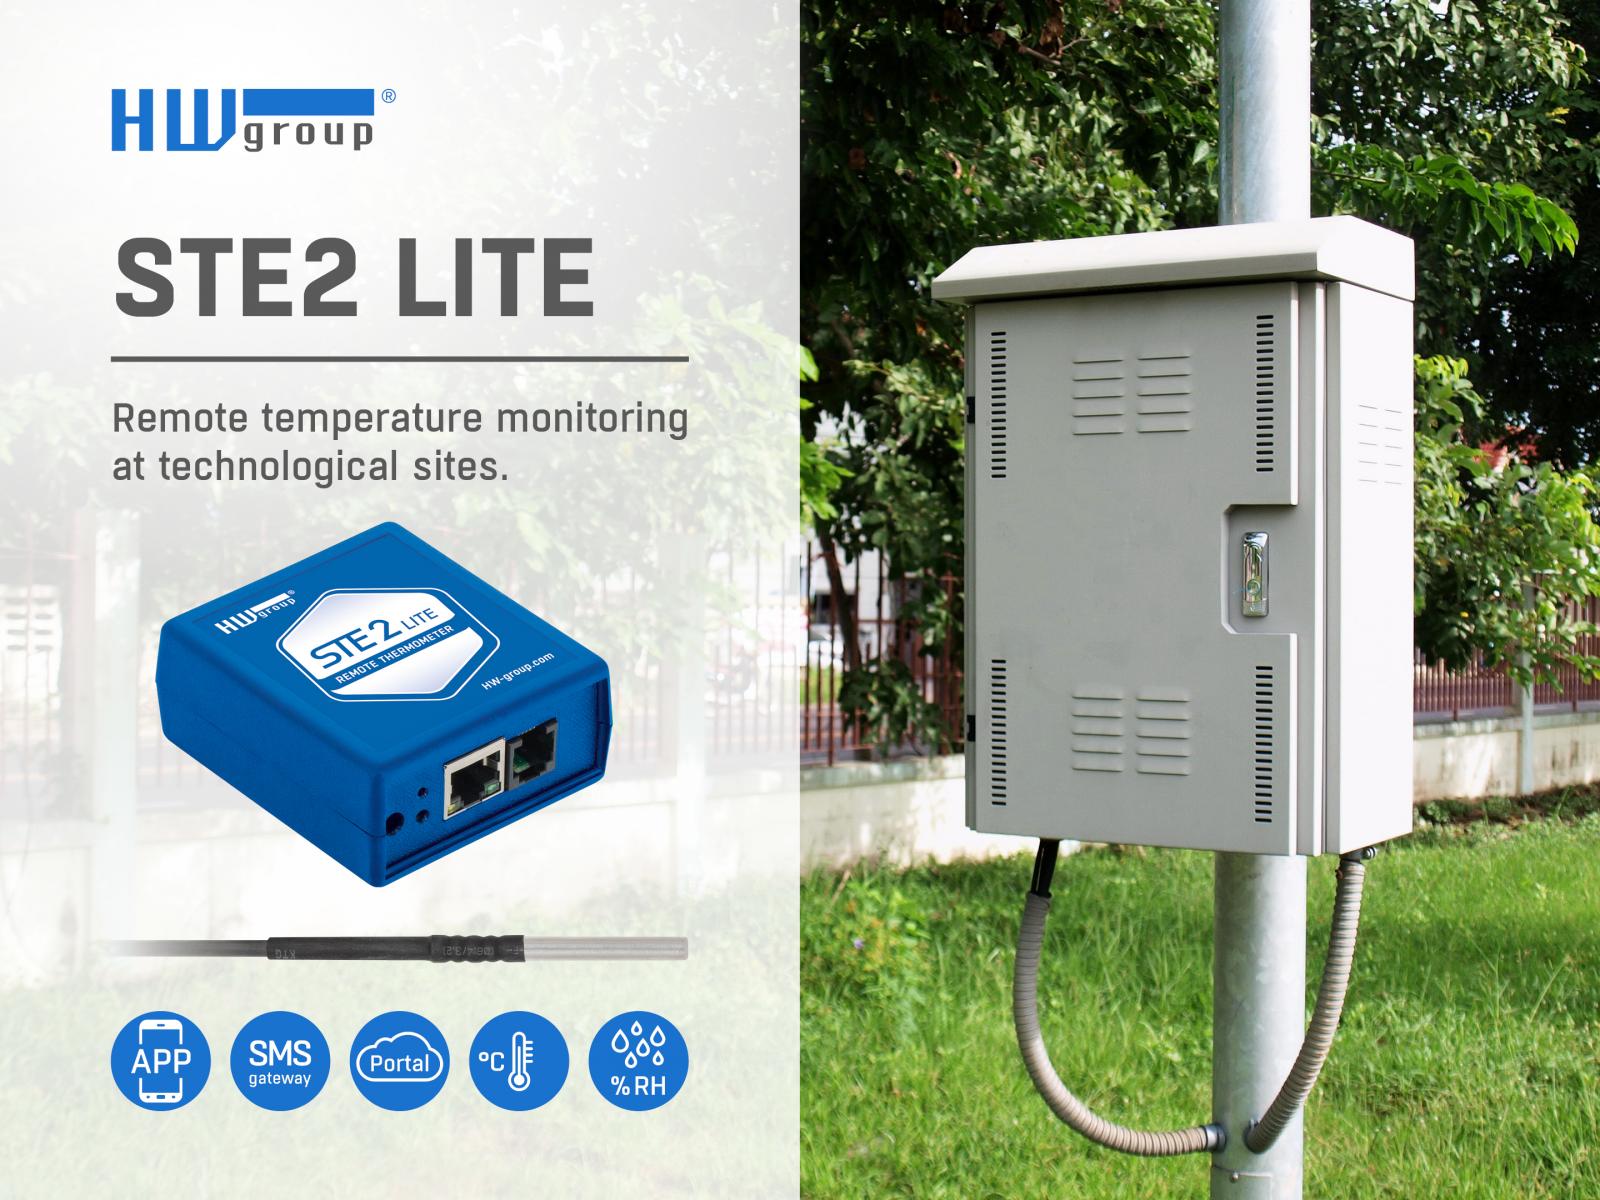 Remote Temperature and Humidity Monitoring with Email, SMS and phone call  alert